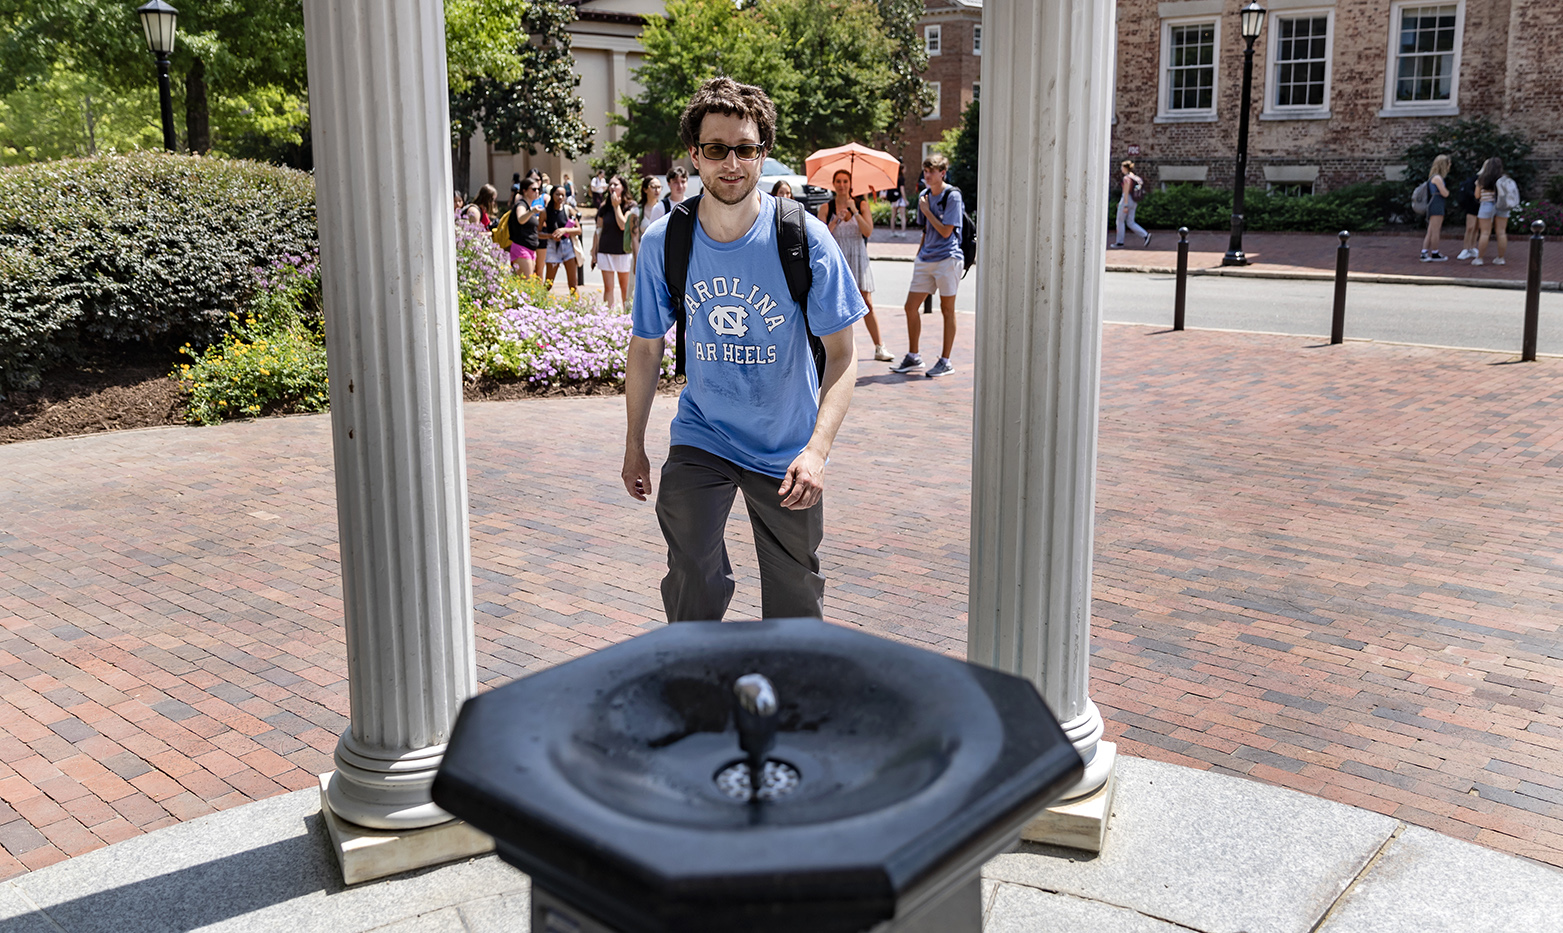 A student approaches the fountain of the Old Well on the campus of UNC-Chapel Hill.